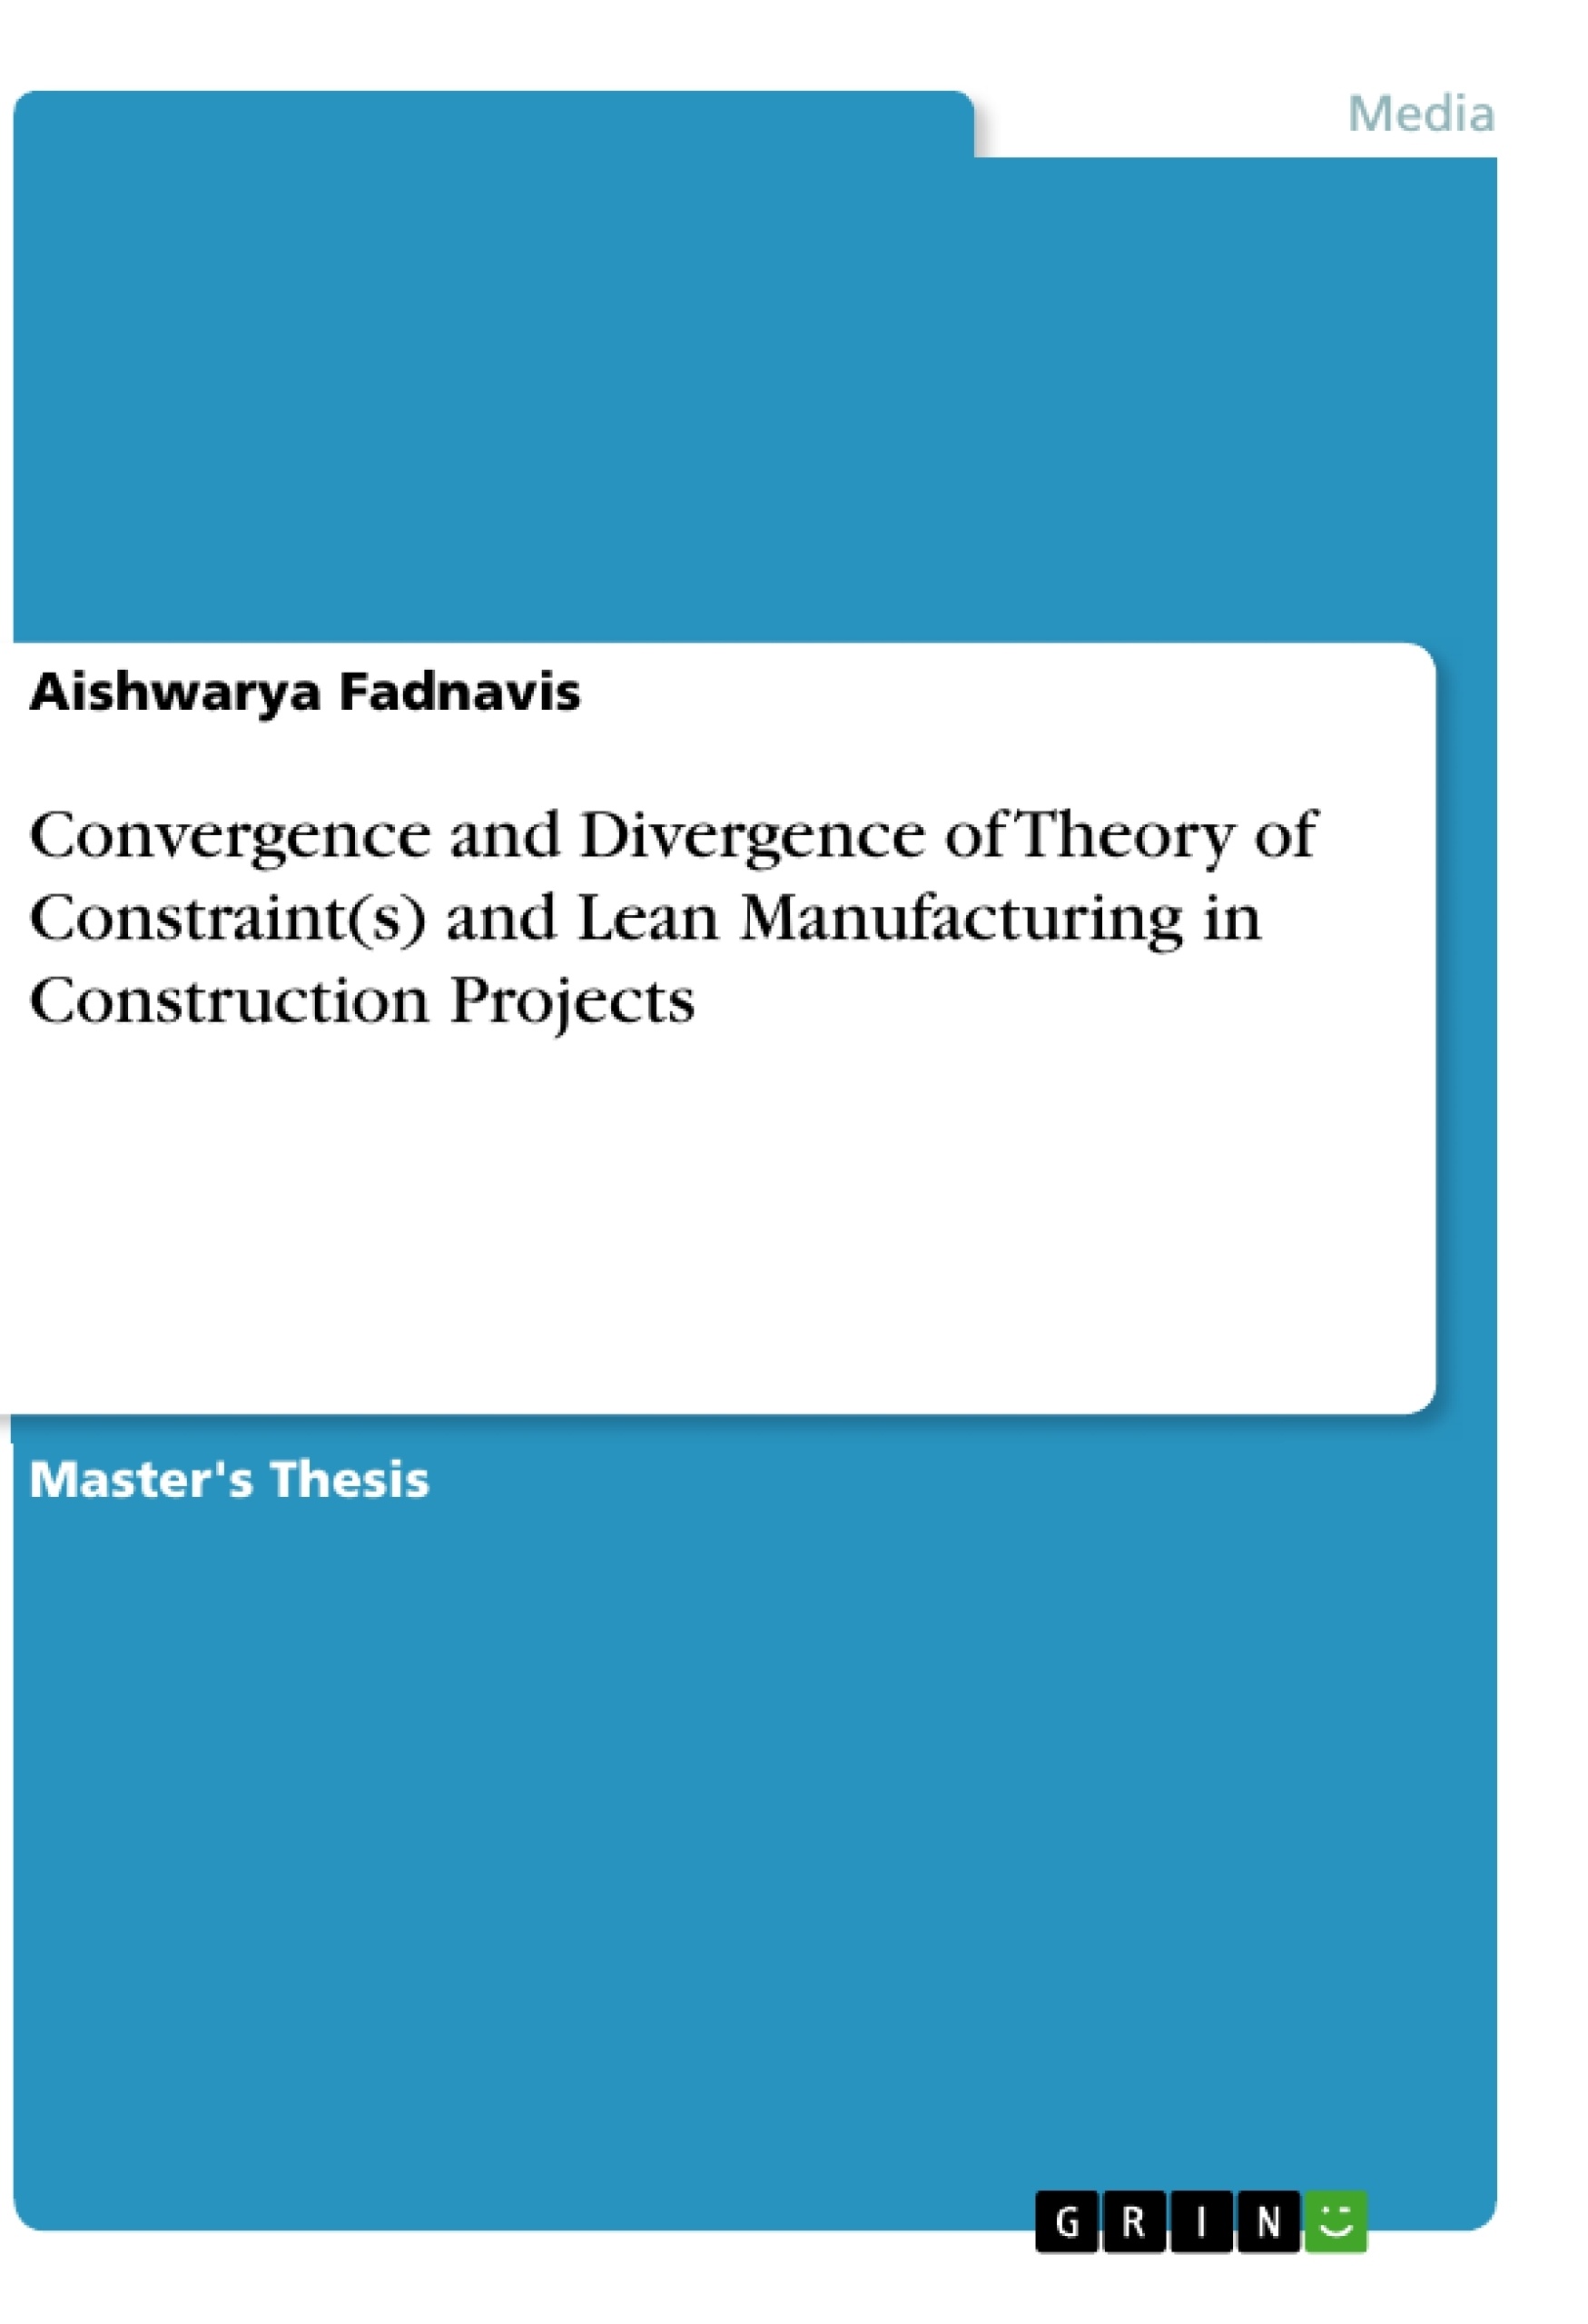 Titre: Convergence and Divergence of Theory of Constraint(s) and Lean Manufacturing in Construction Projects